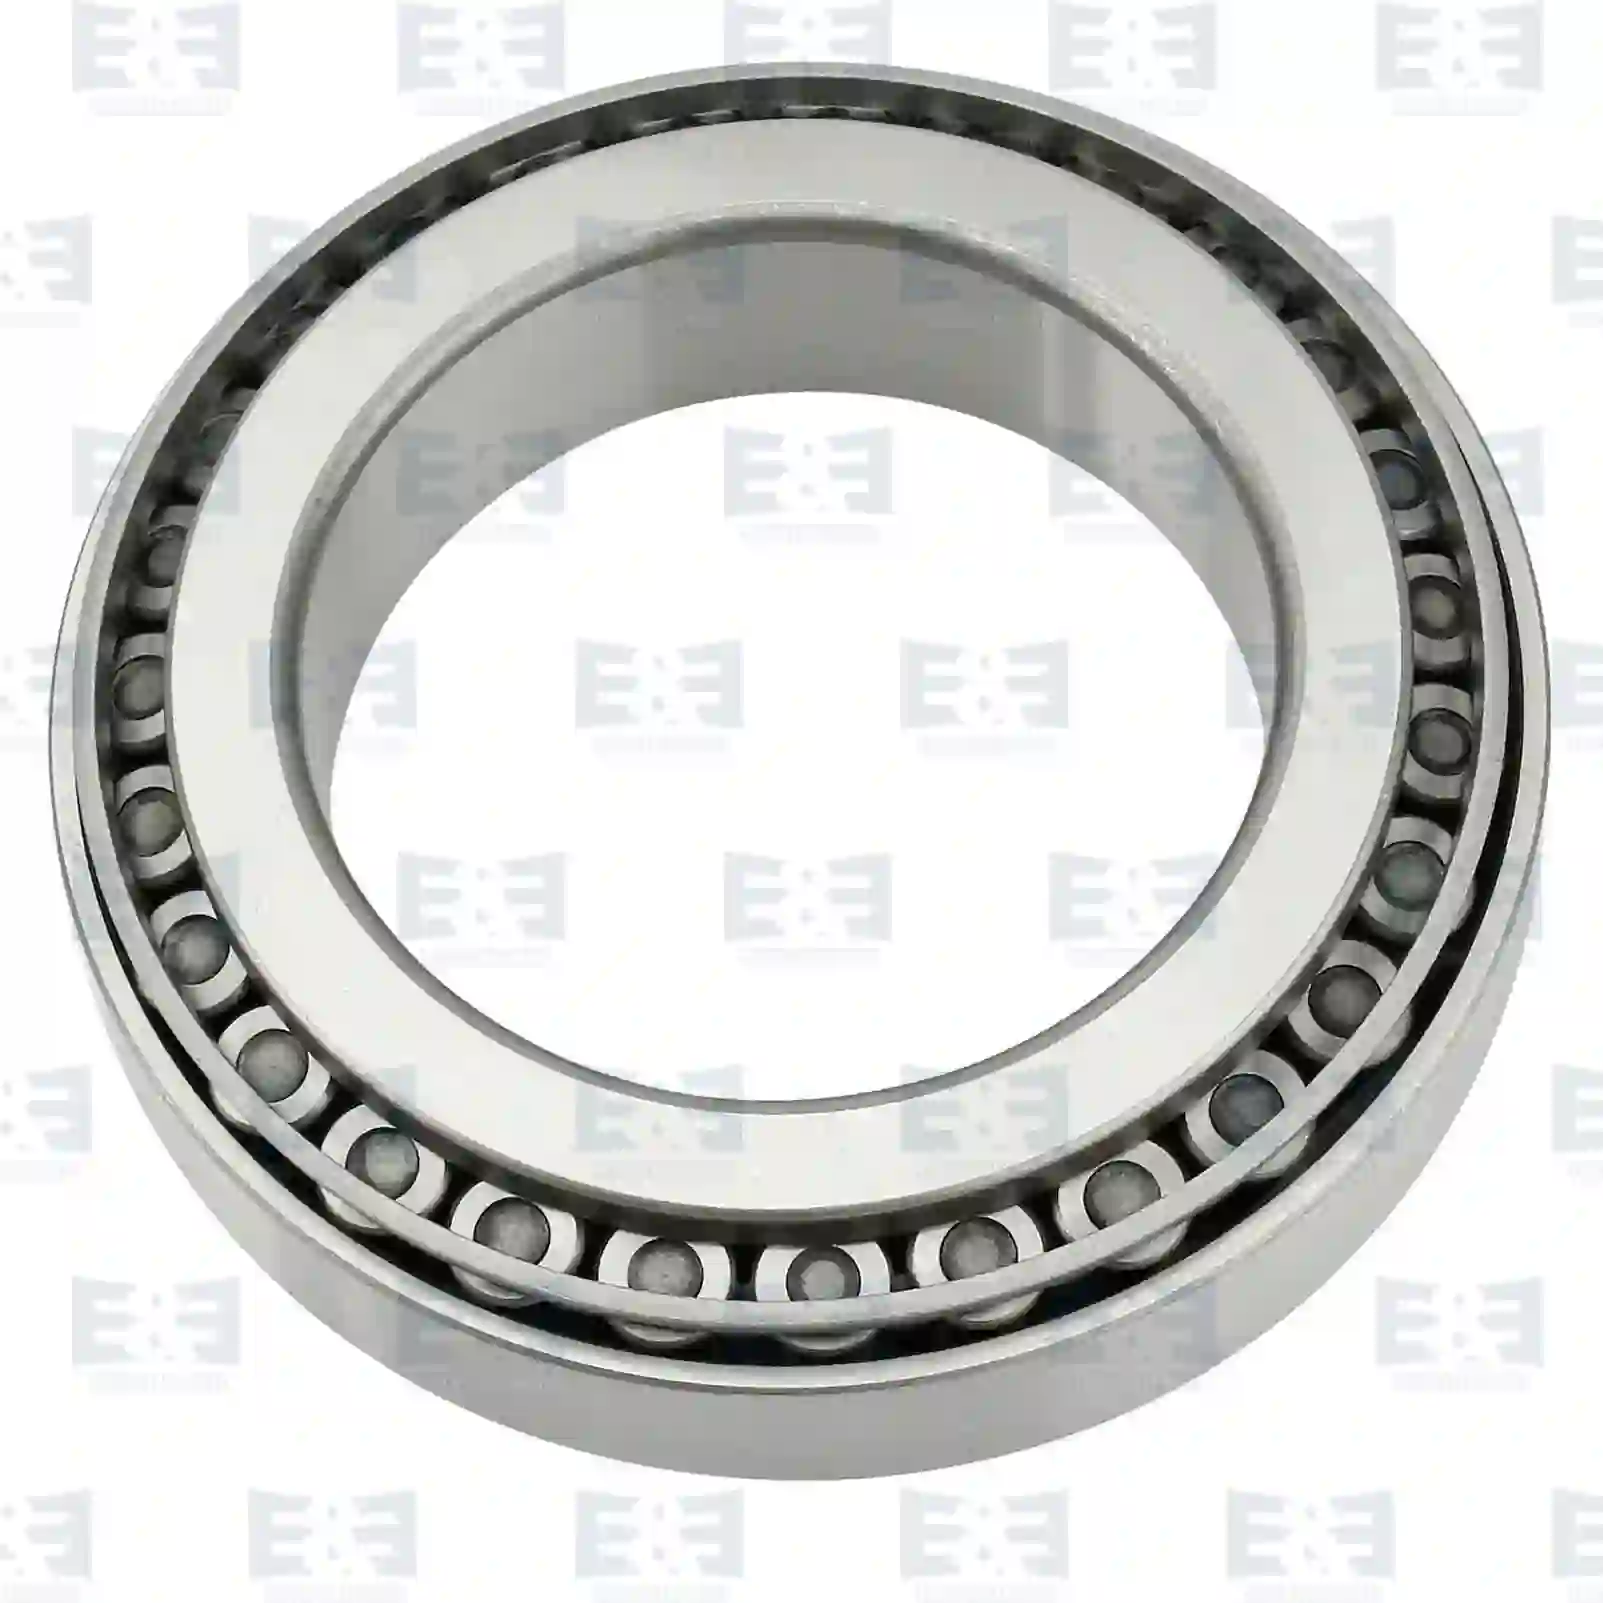 Bearings Tapered roller bearing, EE No 2E2286474 ,  oem no:1040270, 005090762, UNR2000010, 5000786292, 7401524061, 1301682, 1400270, 326826, 1524061, ZG02972-0008 E&E Truck Spare Parts | Truck Spare Parts, Auotomotive Spare Parts